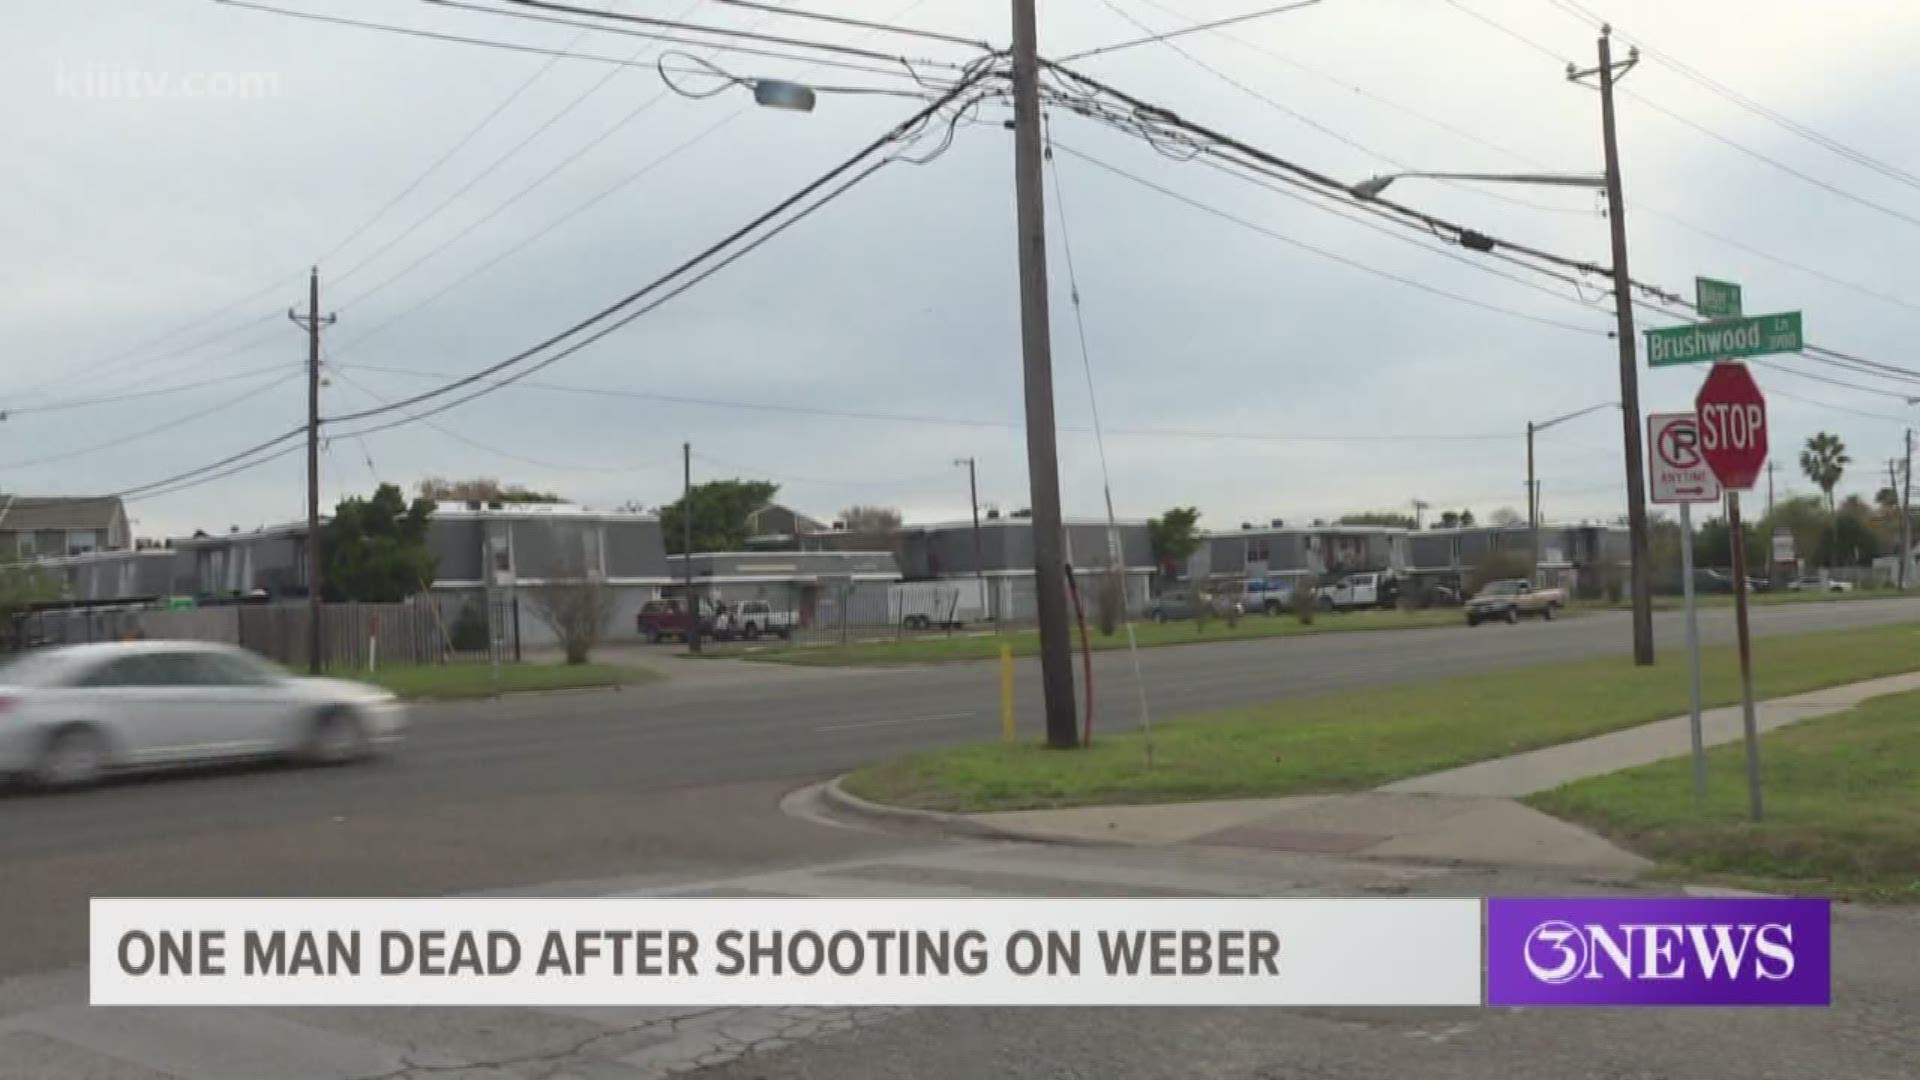 The Corpus Christi Police Department was called to the 5200 block of Weber Road just before 4 a.m. on Sunday morning.